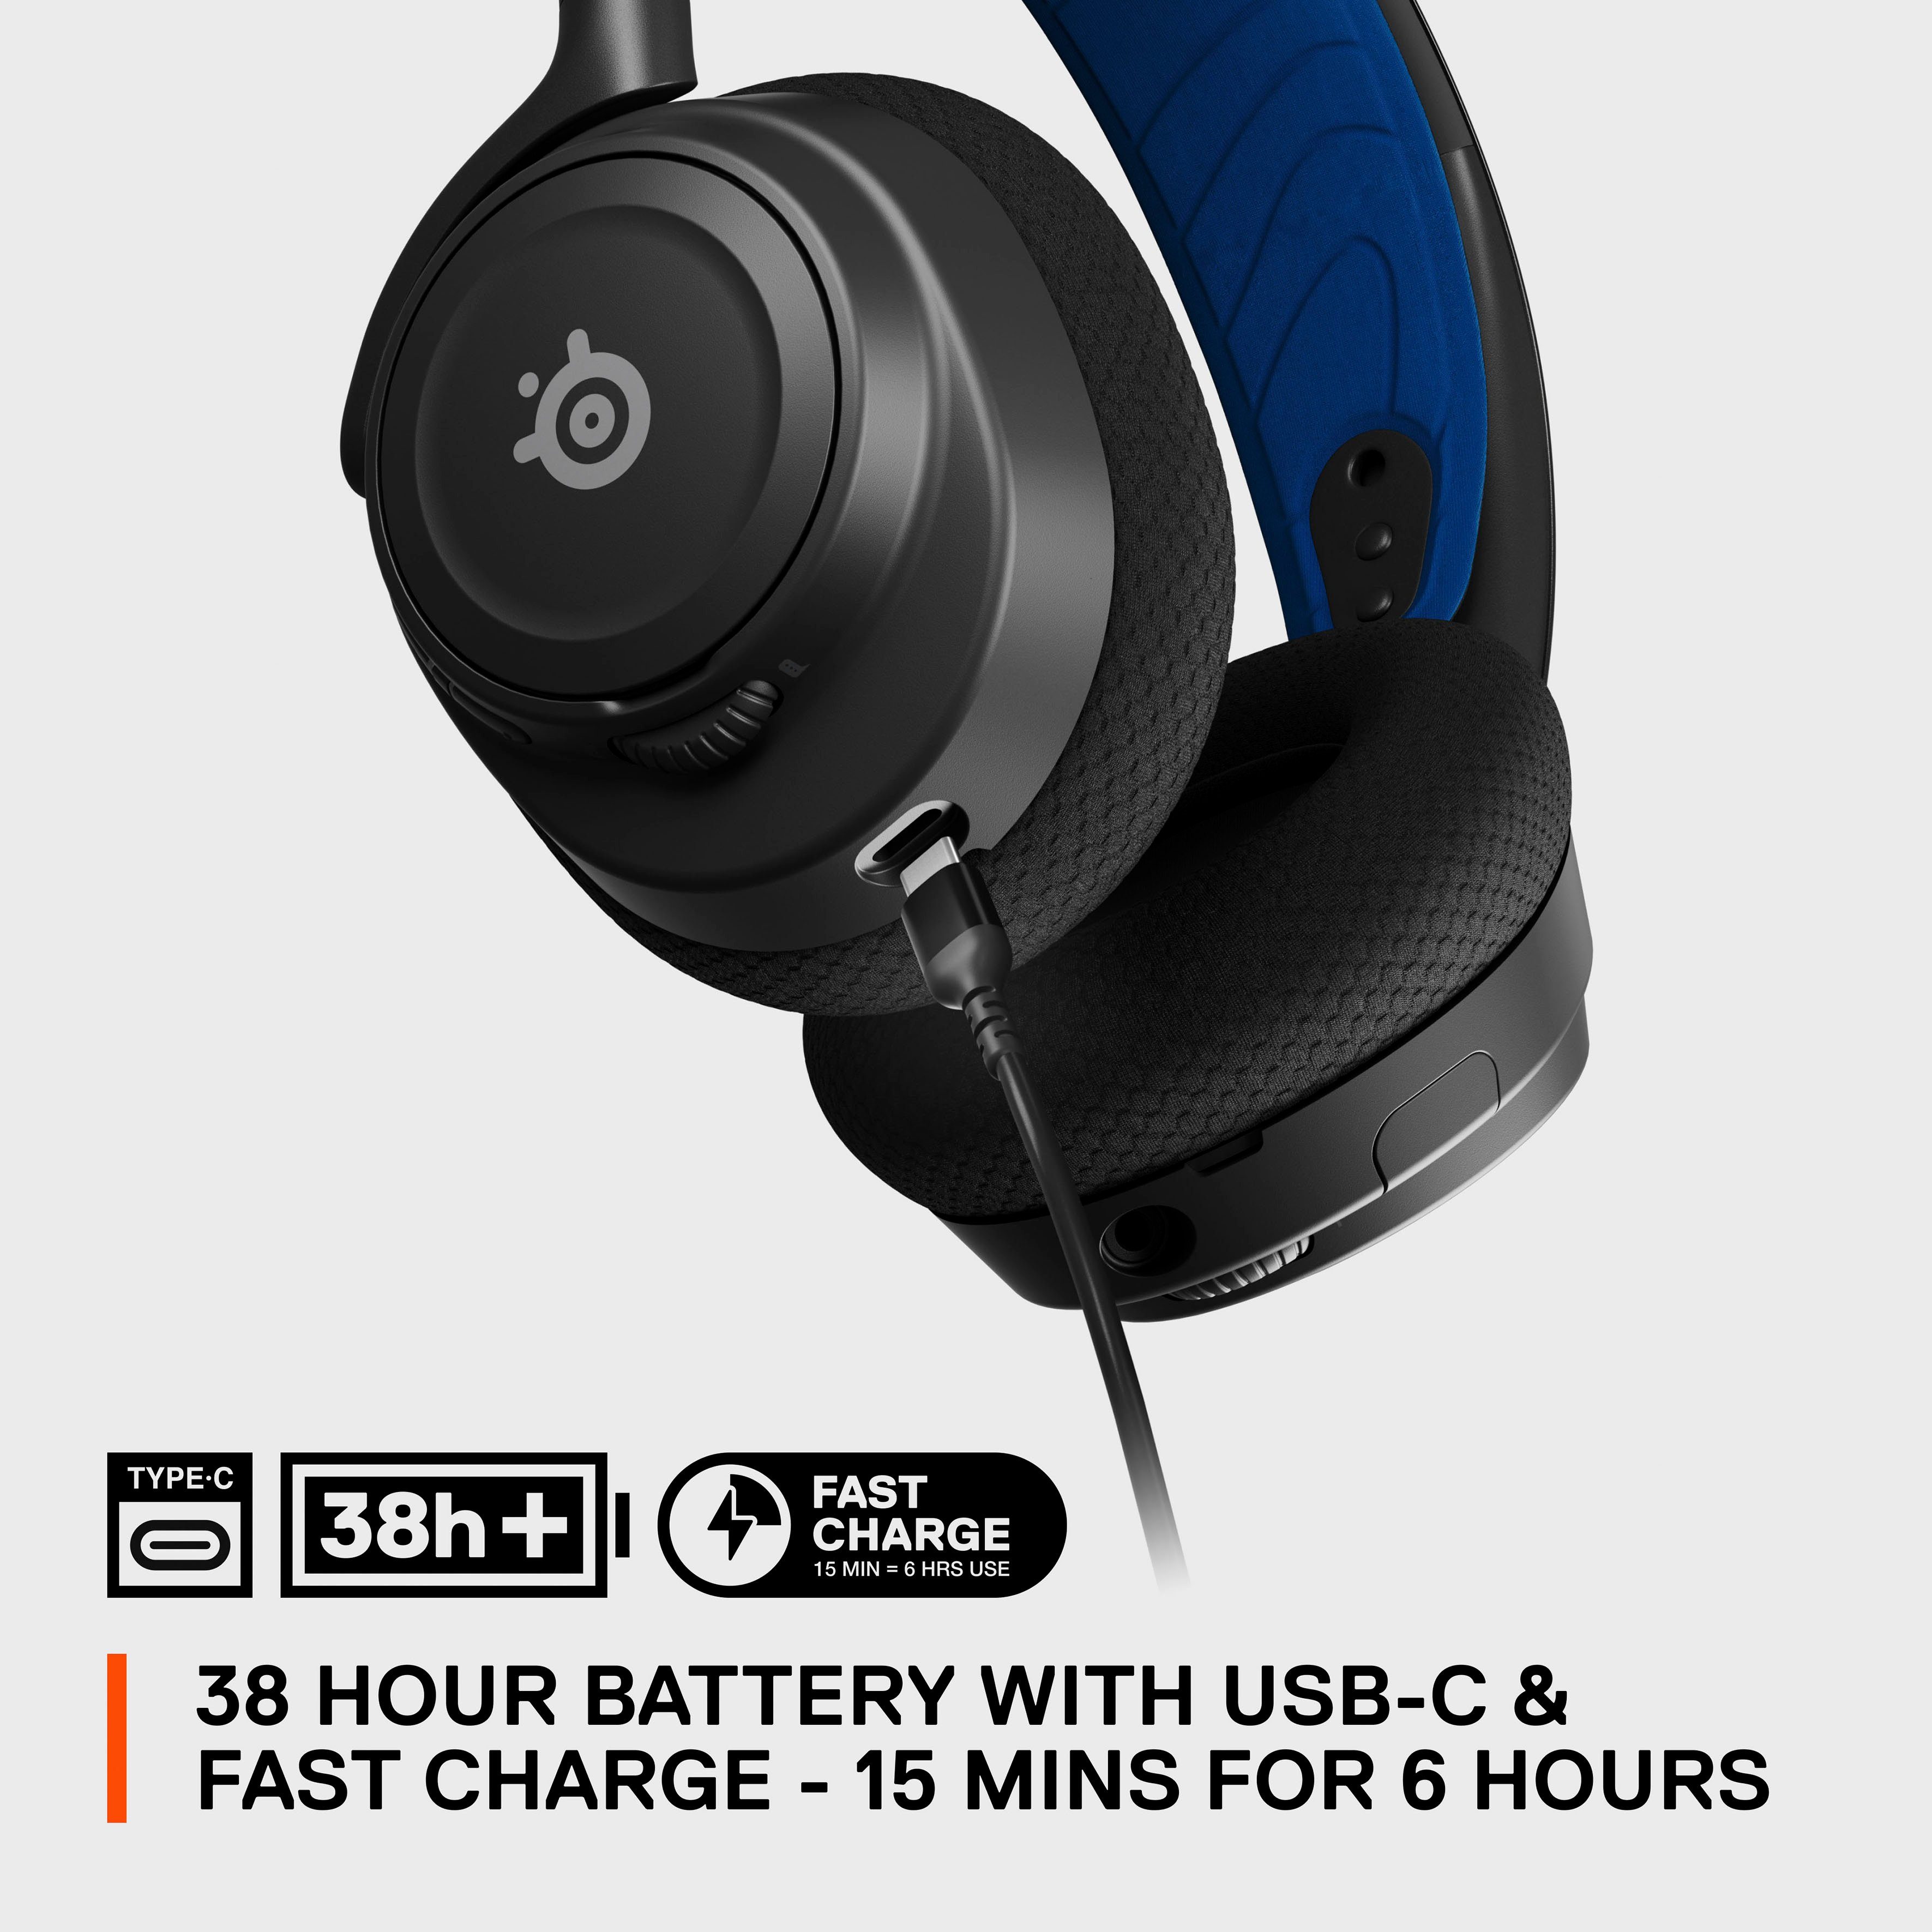 SteelSeries Arctis 7P Nova (Noise-Cancelling, Bluetooth, Gaming-Headset Wireless)